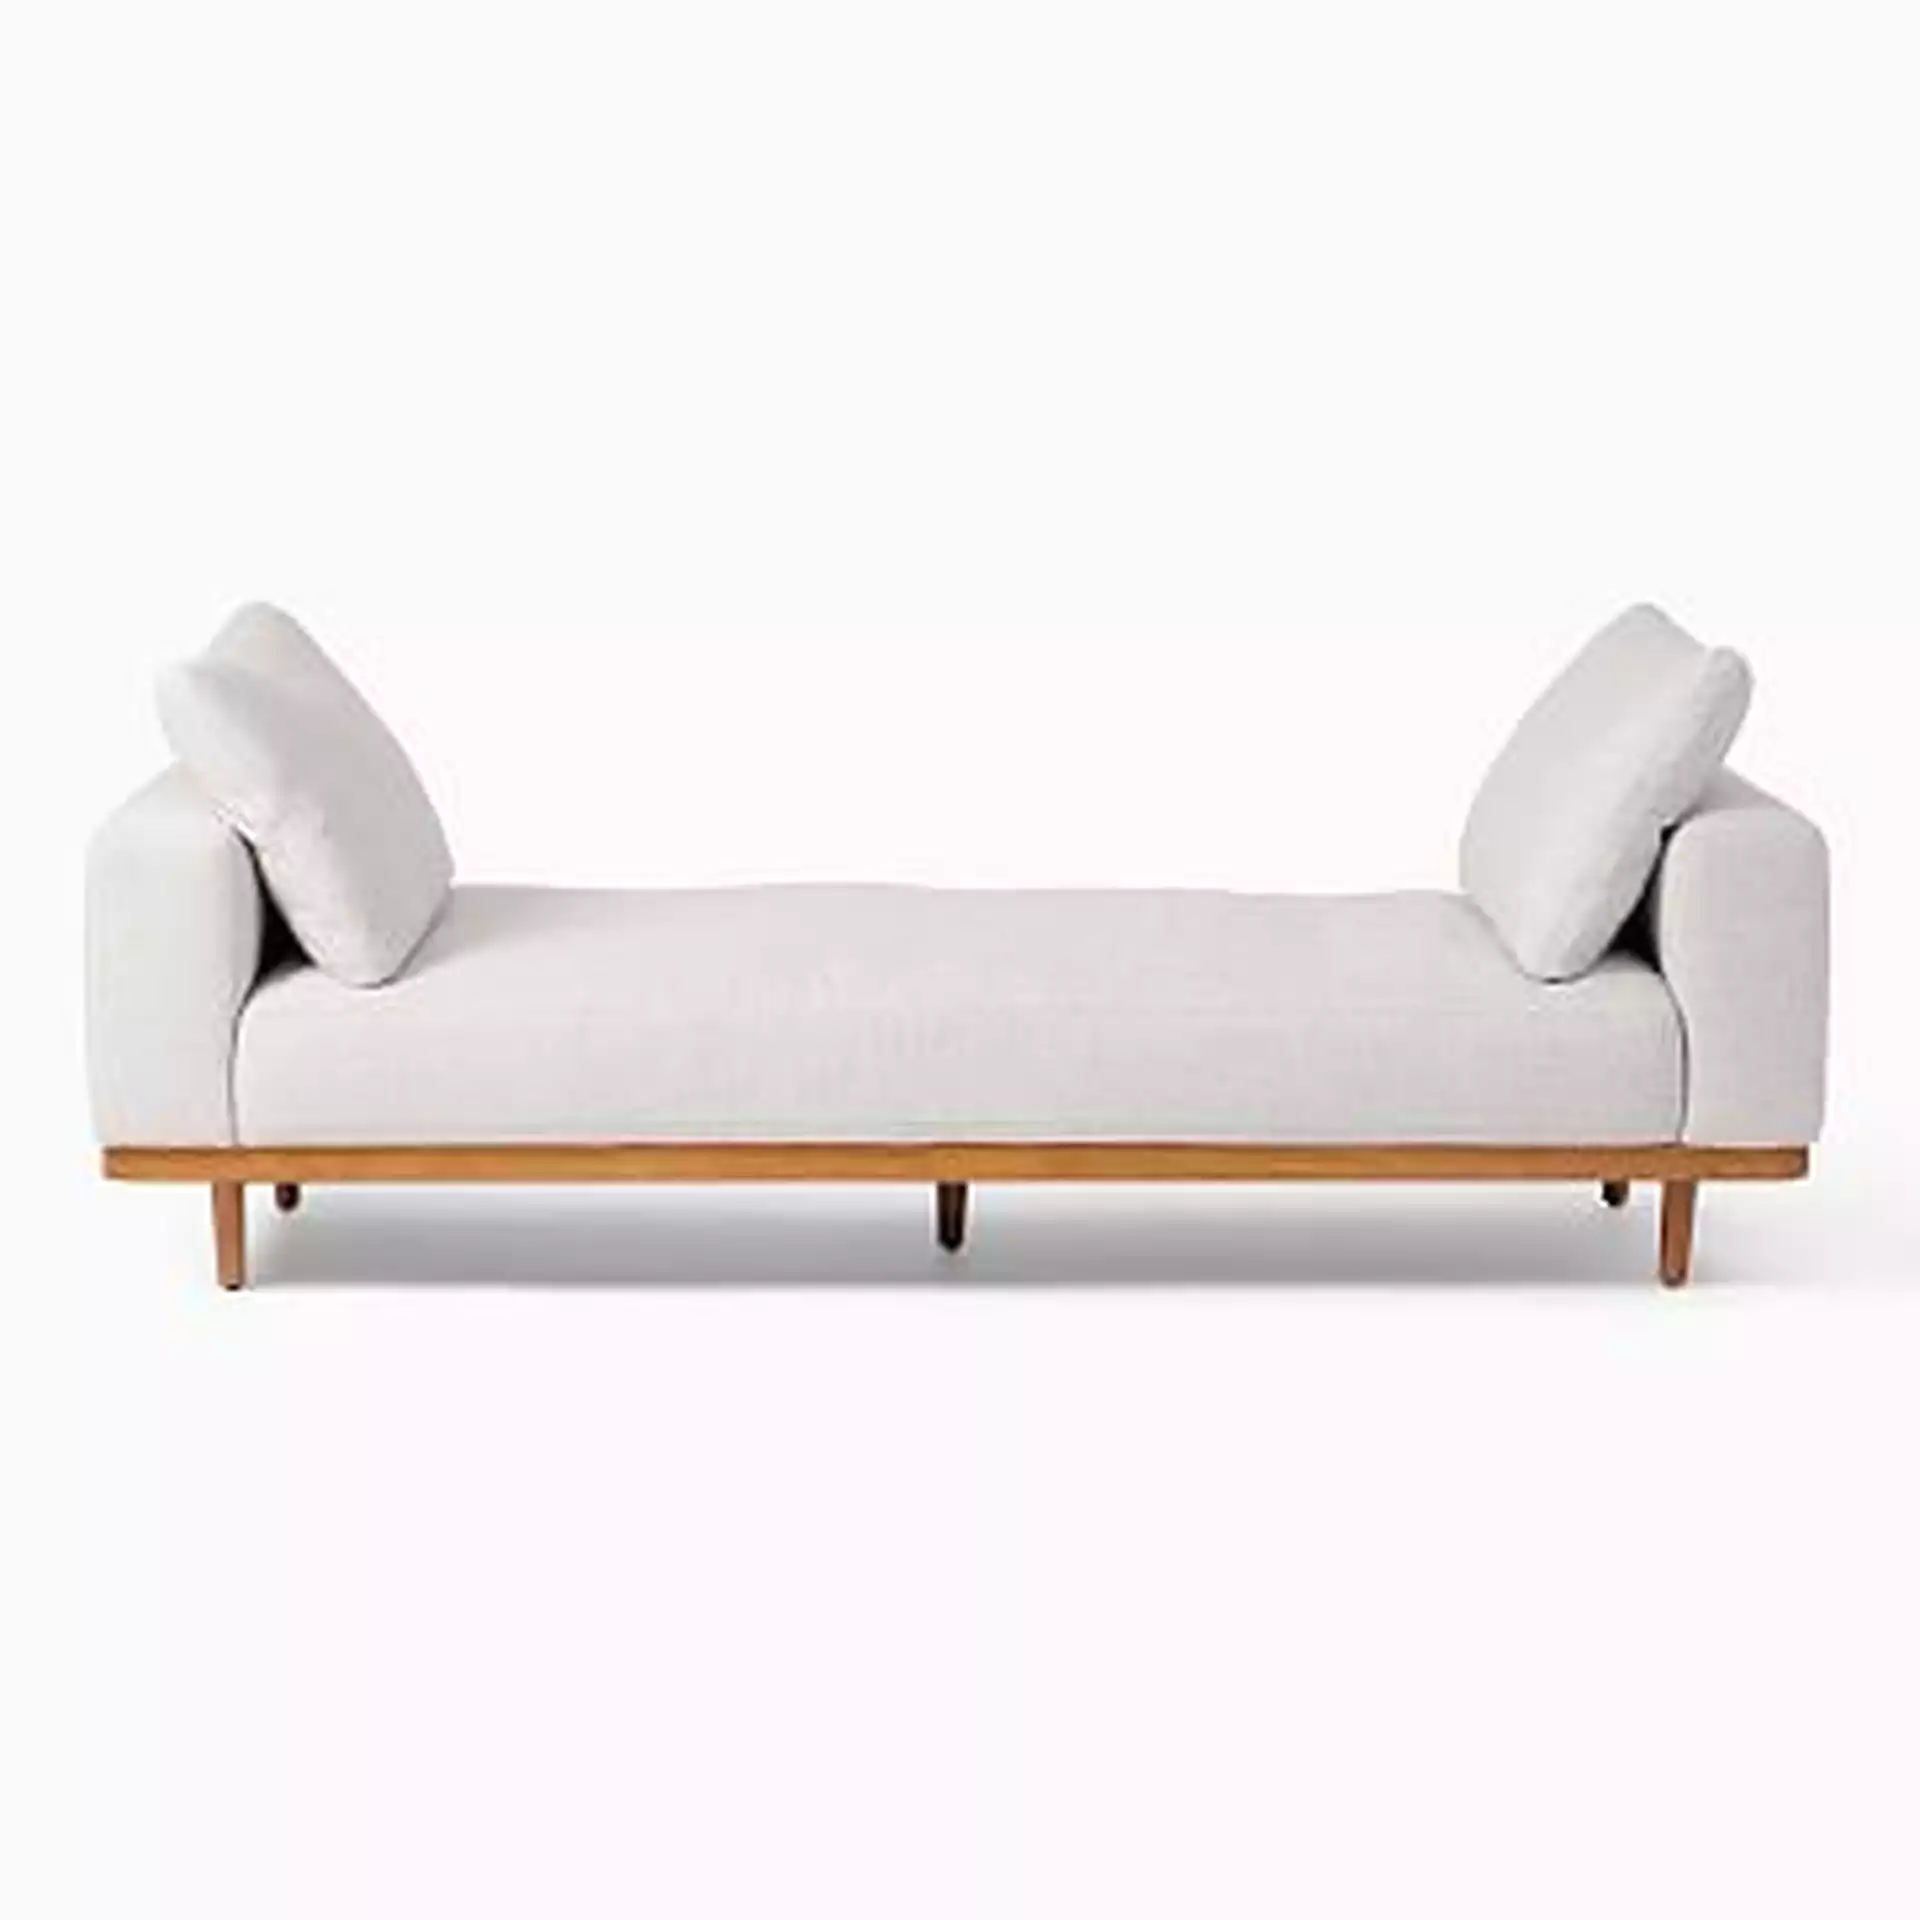 Newport Daybed, Down, Yarn Dyed Linen Weave, Alabaster, Pecan